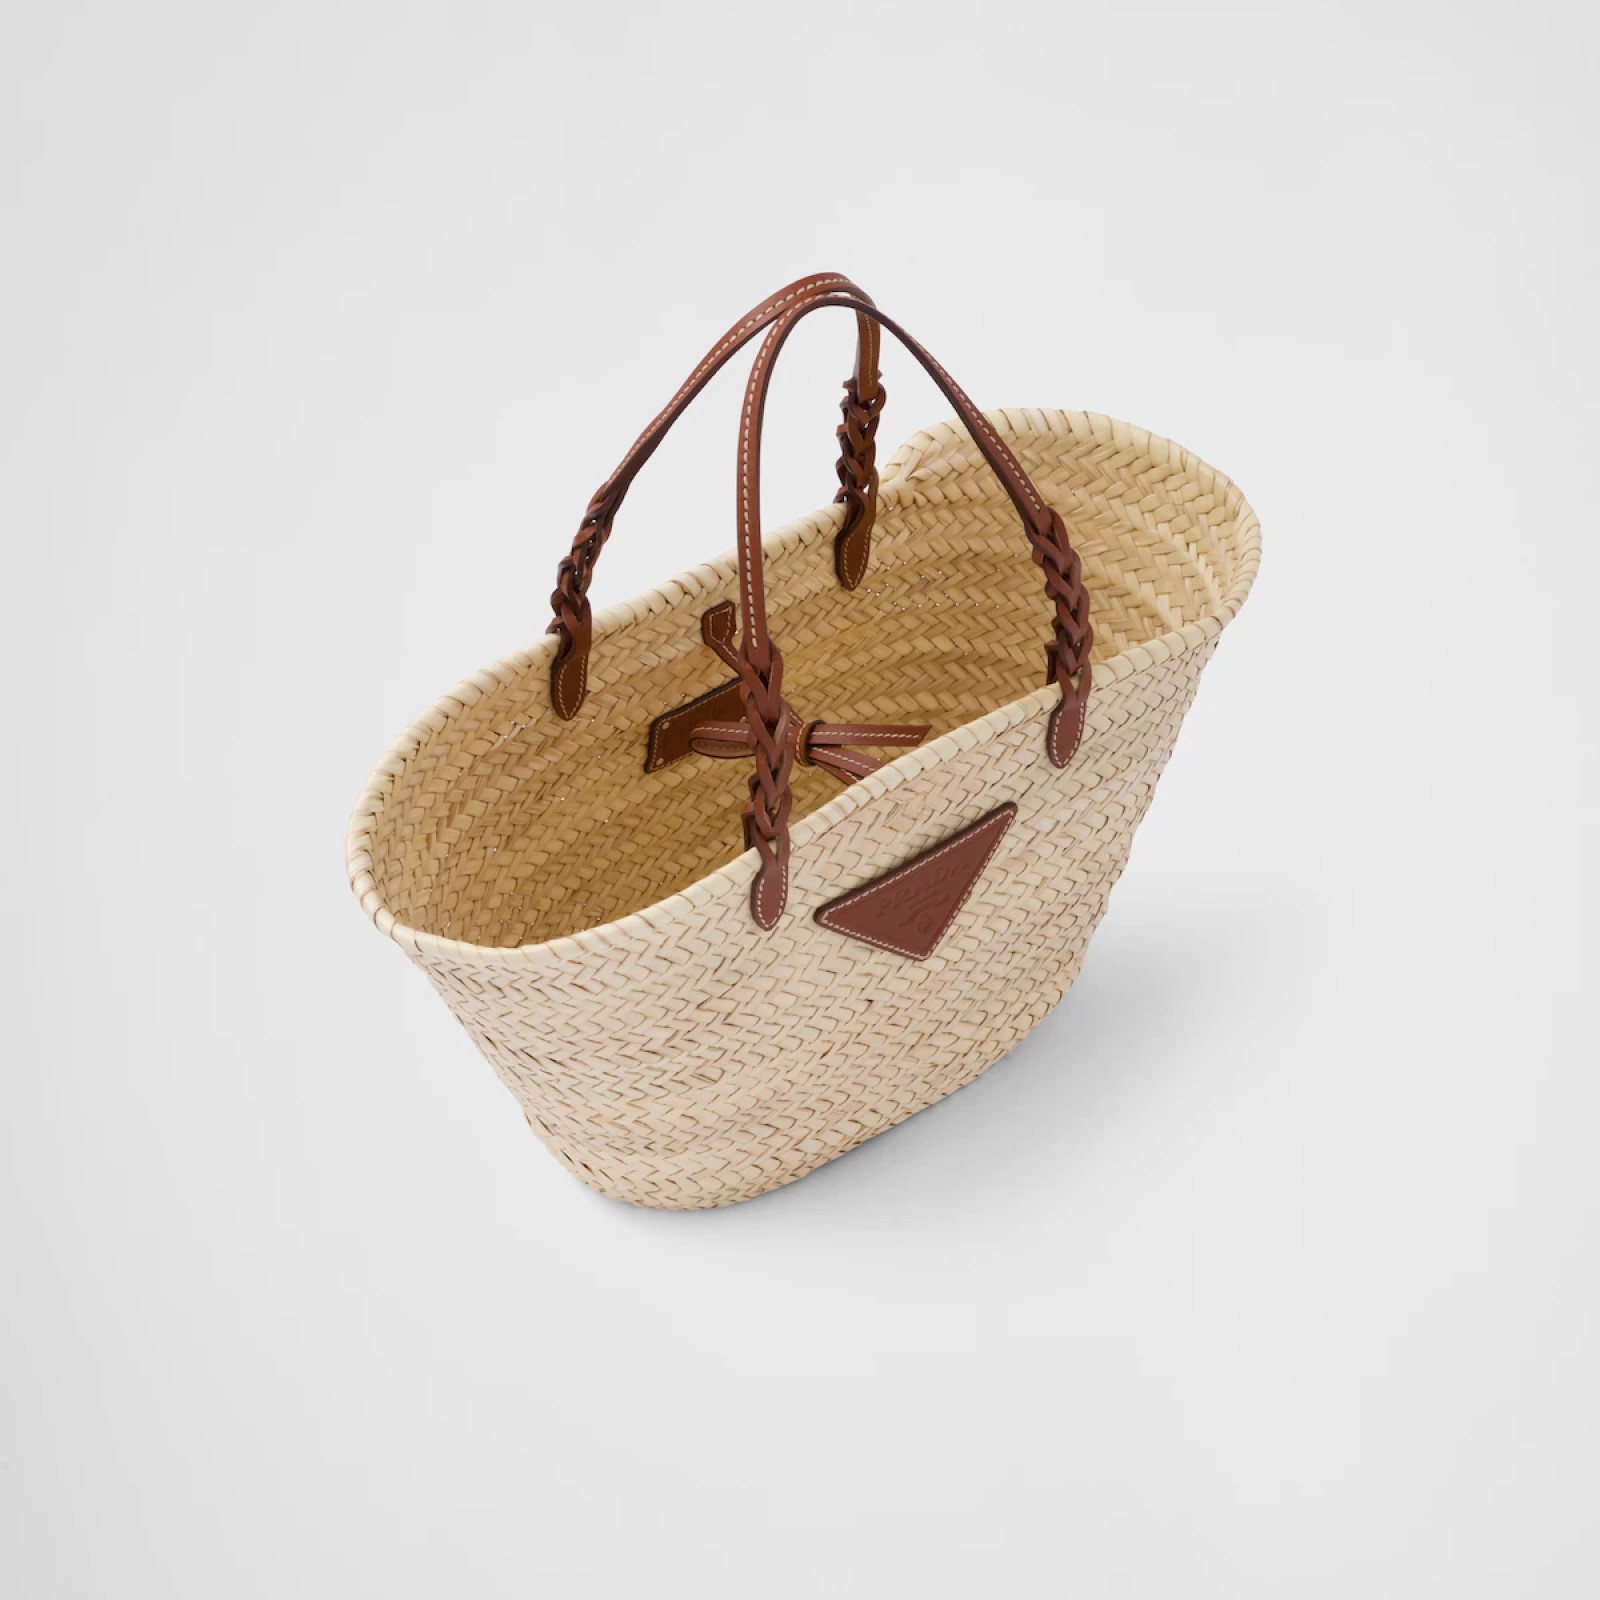 Woven palmito and leather tote bag